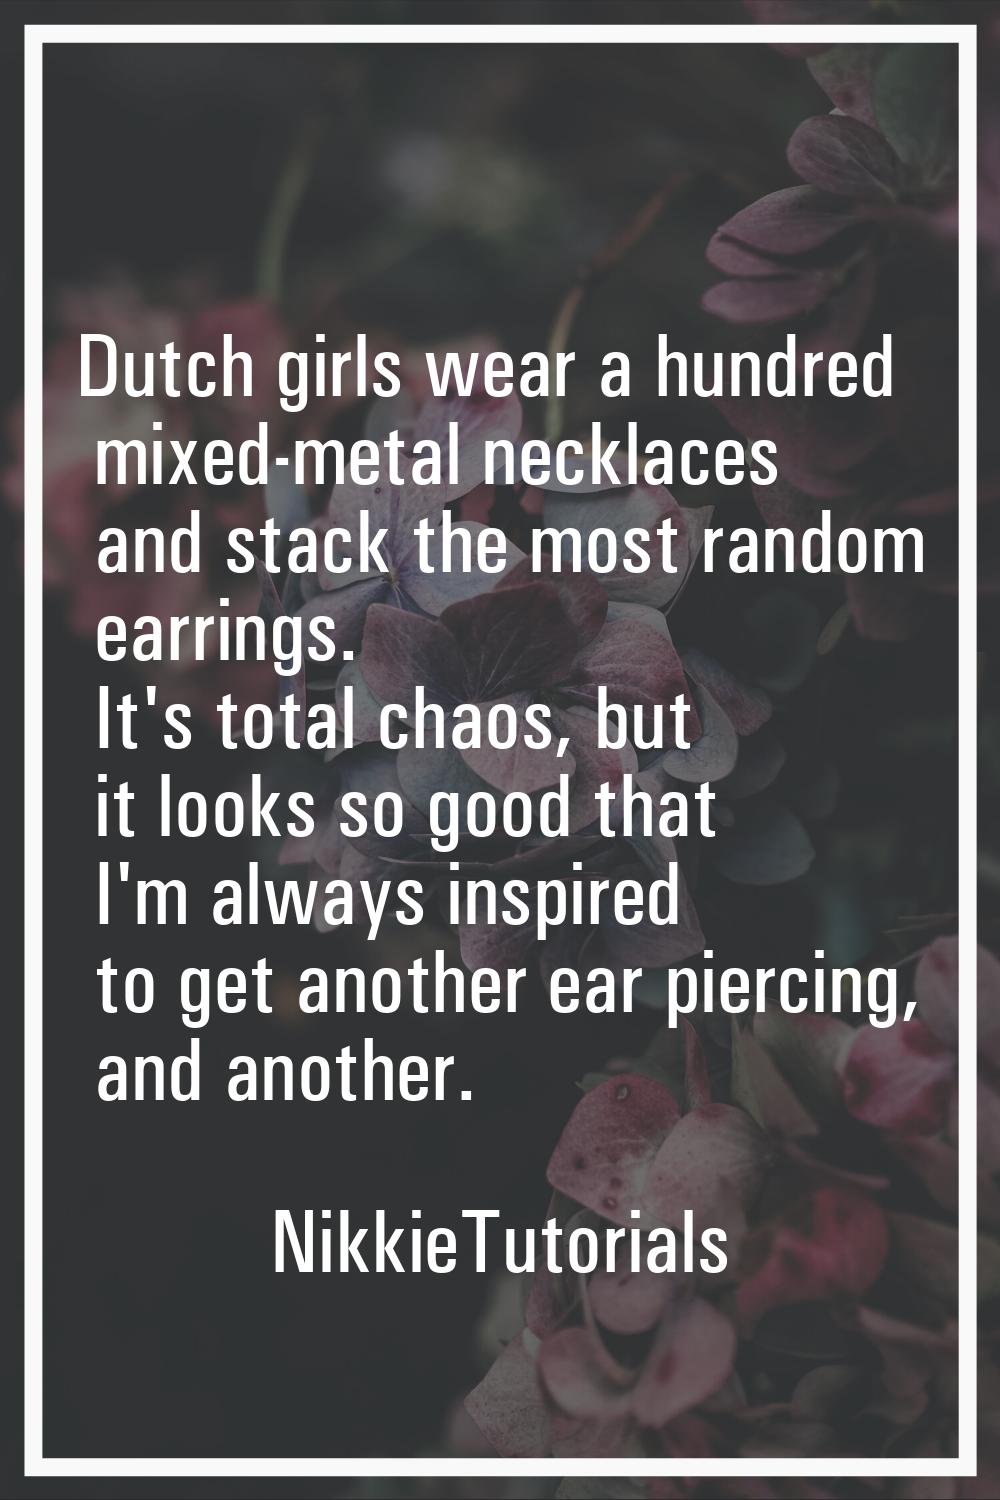 Dutch girls wear a hundred mixed-metal necklaces and stack the most random earrings. It's total cha